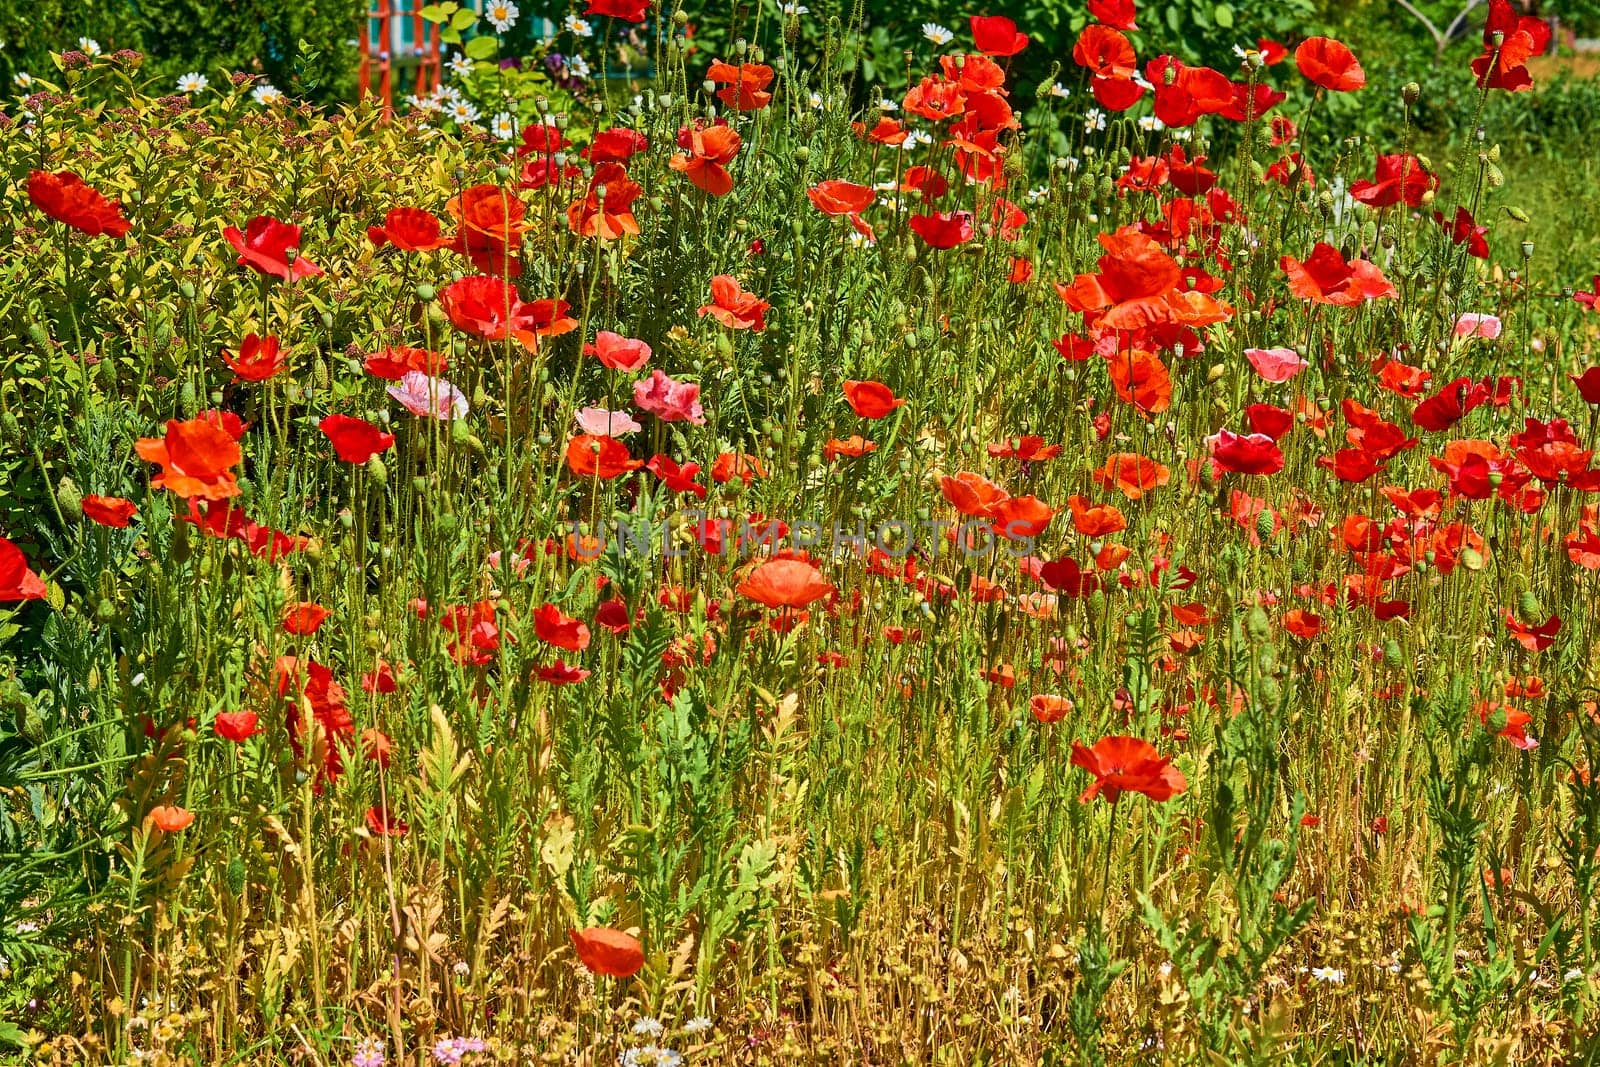 a herbaceous plant with showy flowers, milky sap, and rounded seed capsules. Many poppies contain alkaloids and are a source of drugs